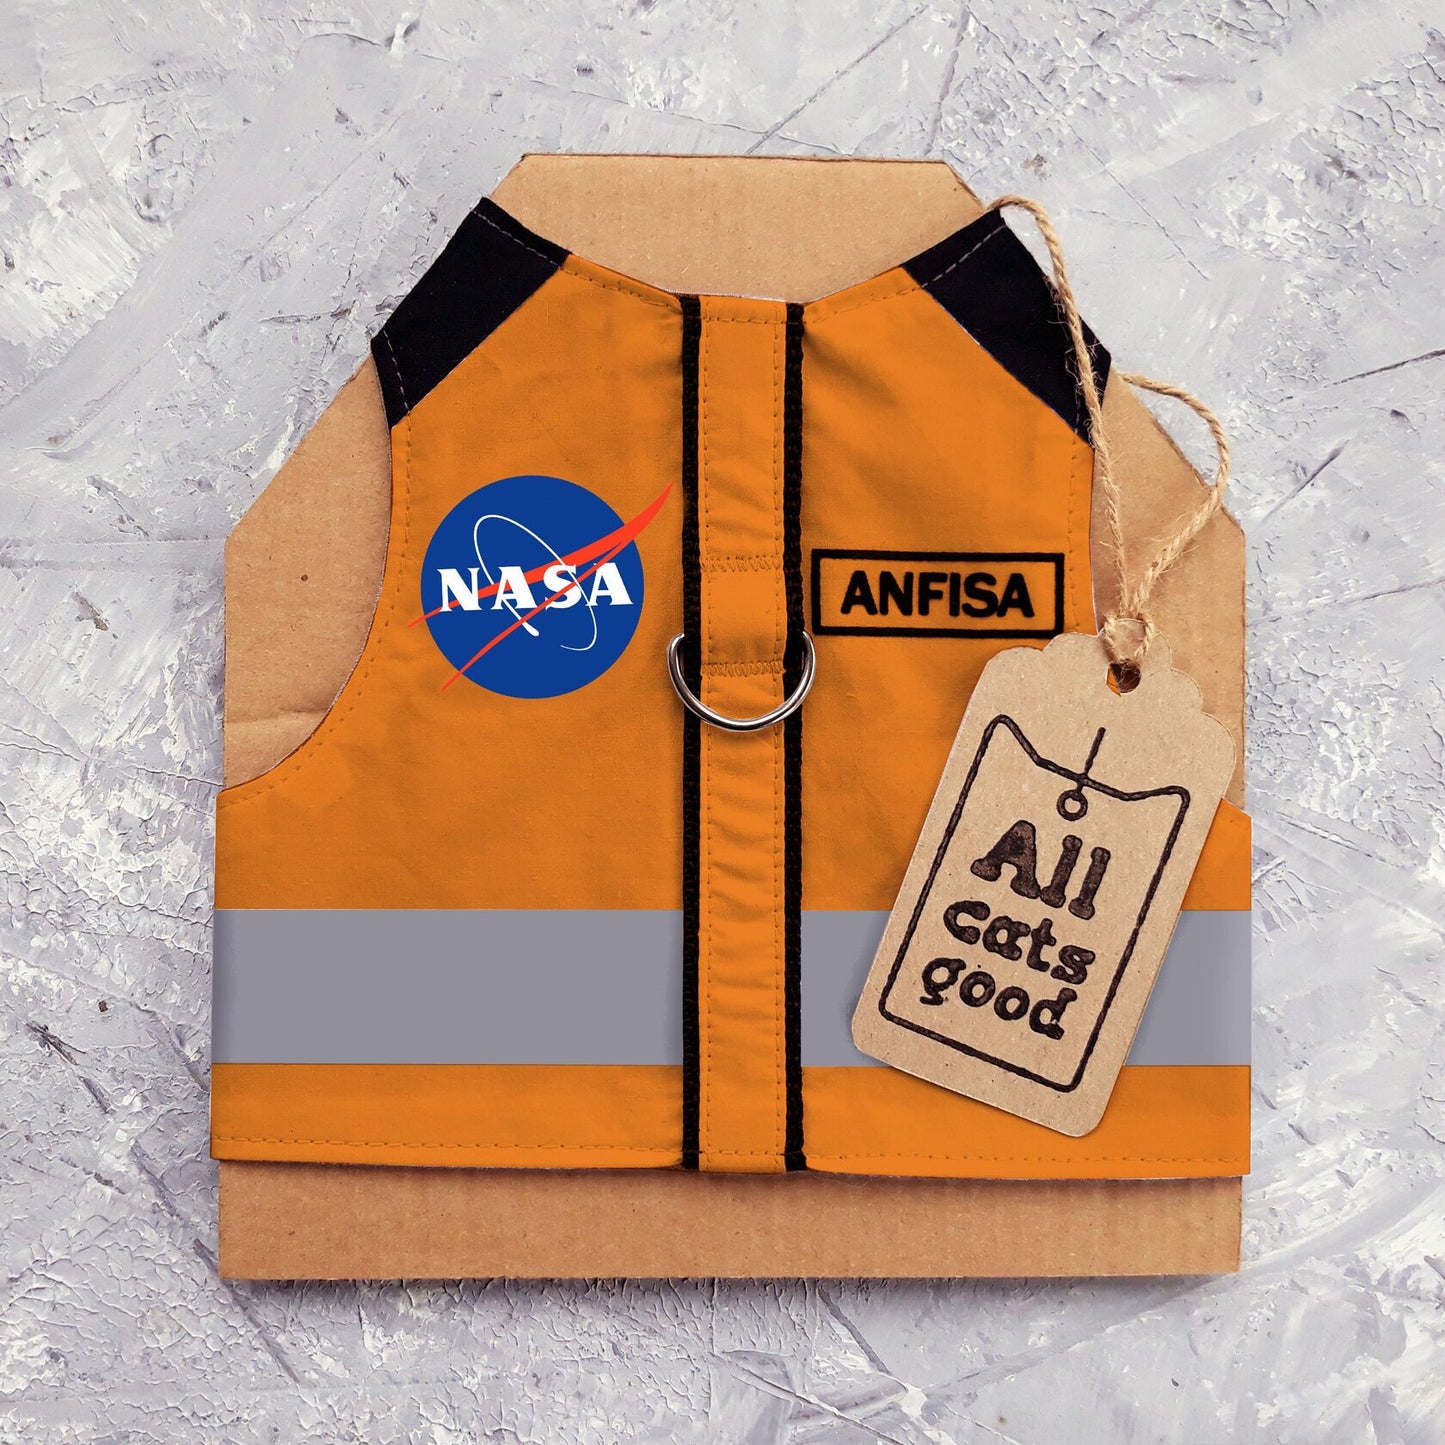 Difficult to escape personalized orange NASA cat harness with your cat's name and reflective stripe